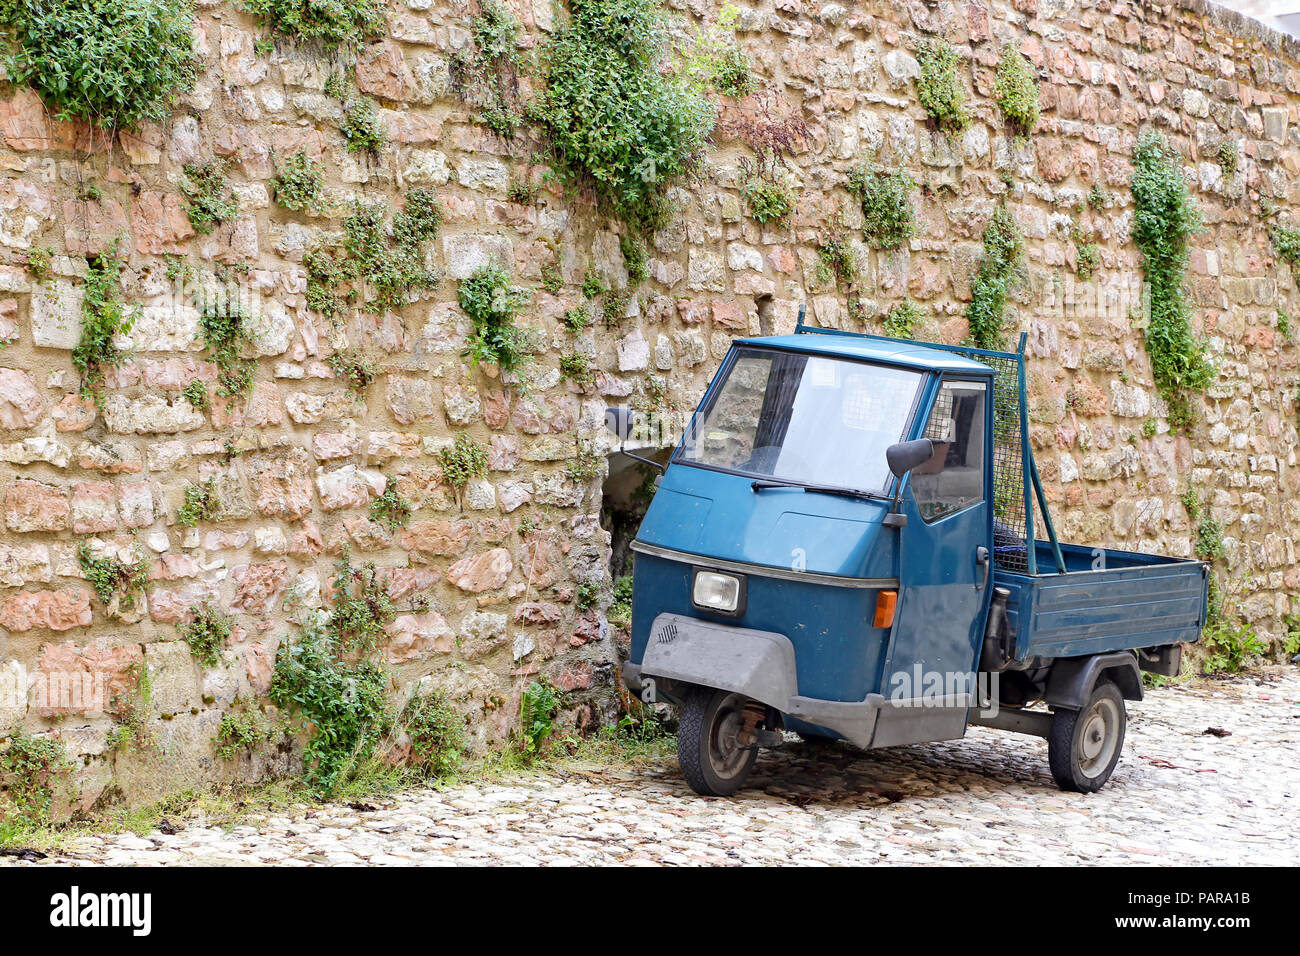 VISSO, ITALY - MAY 31, 2014: a picturesque old alley with dwellings and an ancient italian vehicle Ape Piaggio, on May 31, 2014 in Visso, Marche Italy Stock Photo